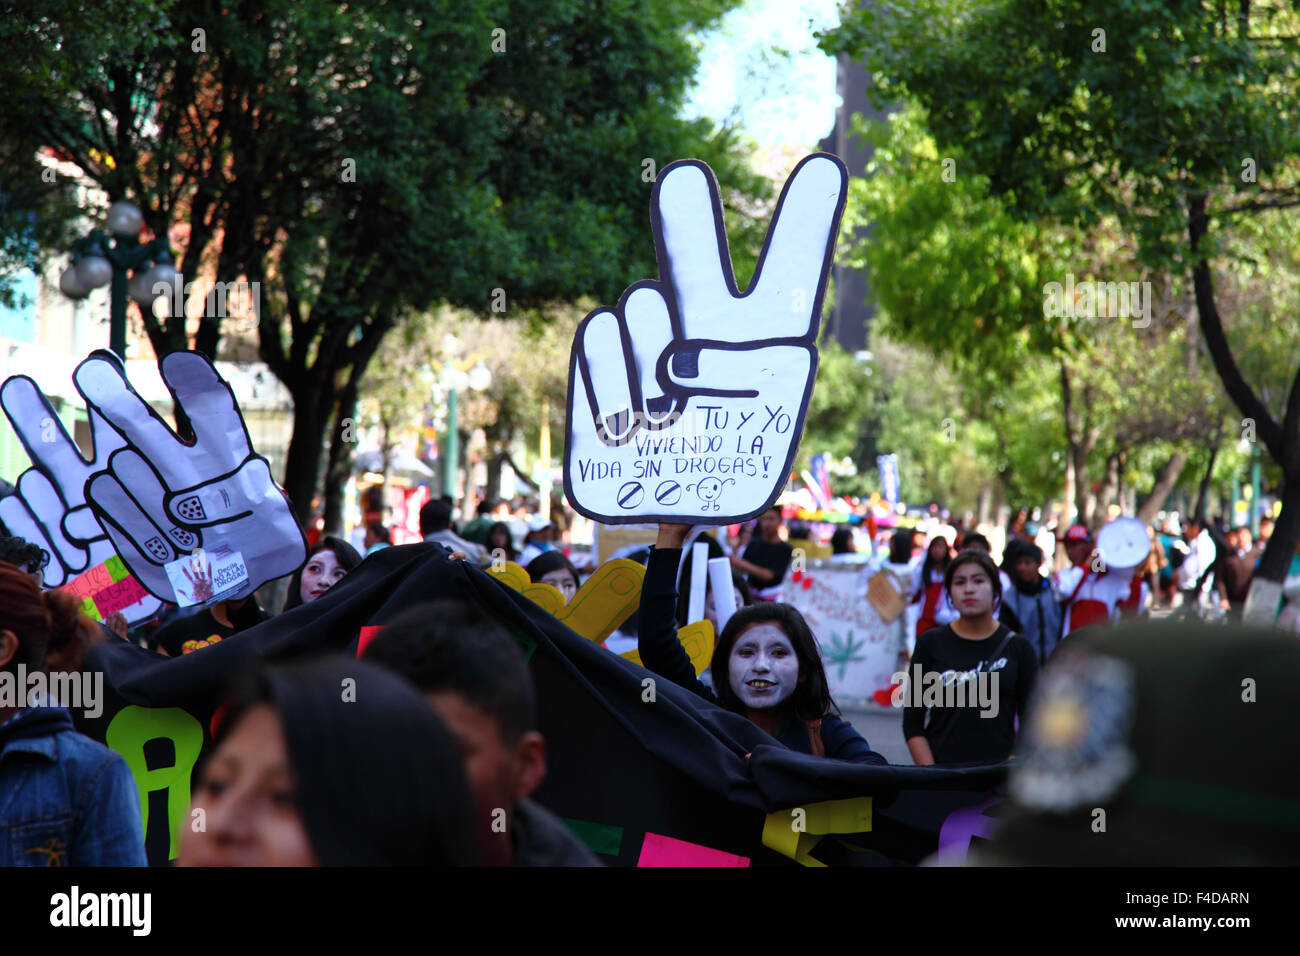 La Paz, Bolivia, 16th October 2015. A female student carries a large white hand making a V-sign for Victory with the slogan 'You and I living a life without drugs' during a march through La Paz city centre warning of the dangers of drug use. The demonstration is organised every year by the police together with schools and colleges to educate and raise awareness about drugs and their dangers. Credit: James Brunker / Alamy Live News Stock Photo